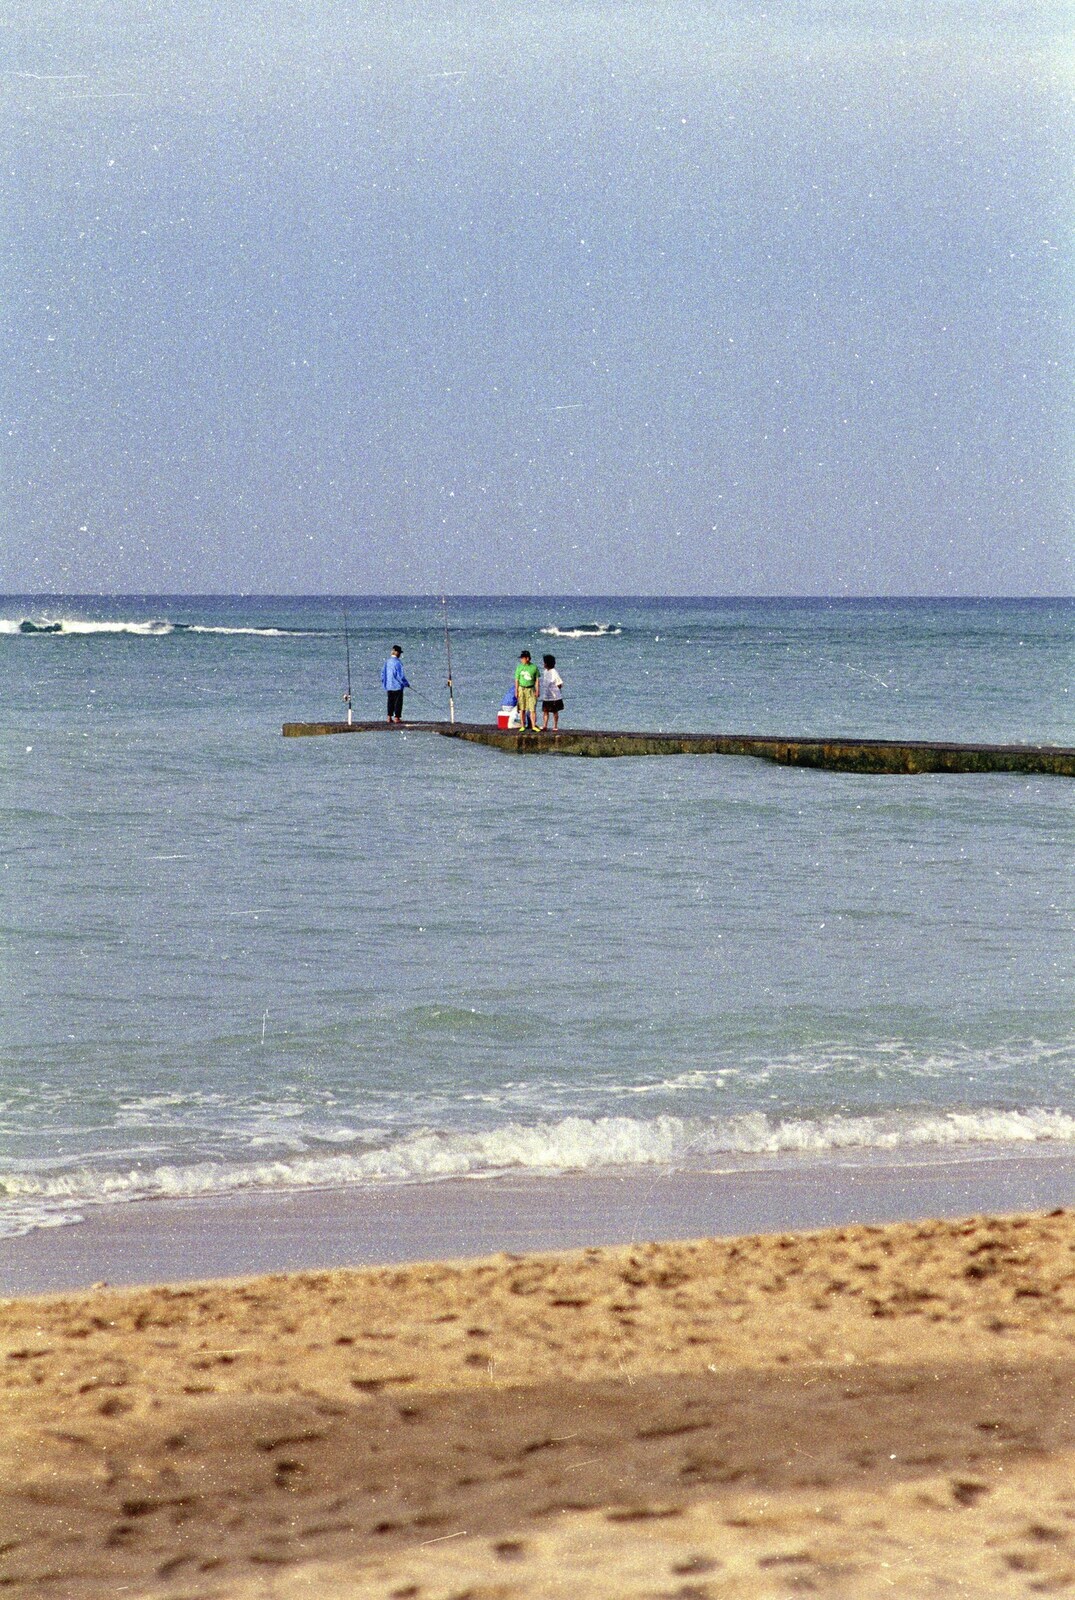 Some boys fish off the pier from A 747 Cockpit, Honolulu and Pearl Harbor, O'ahu, Hawai'i, United States - 20th November 1992